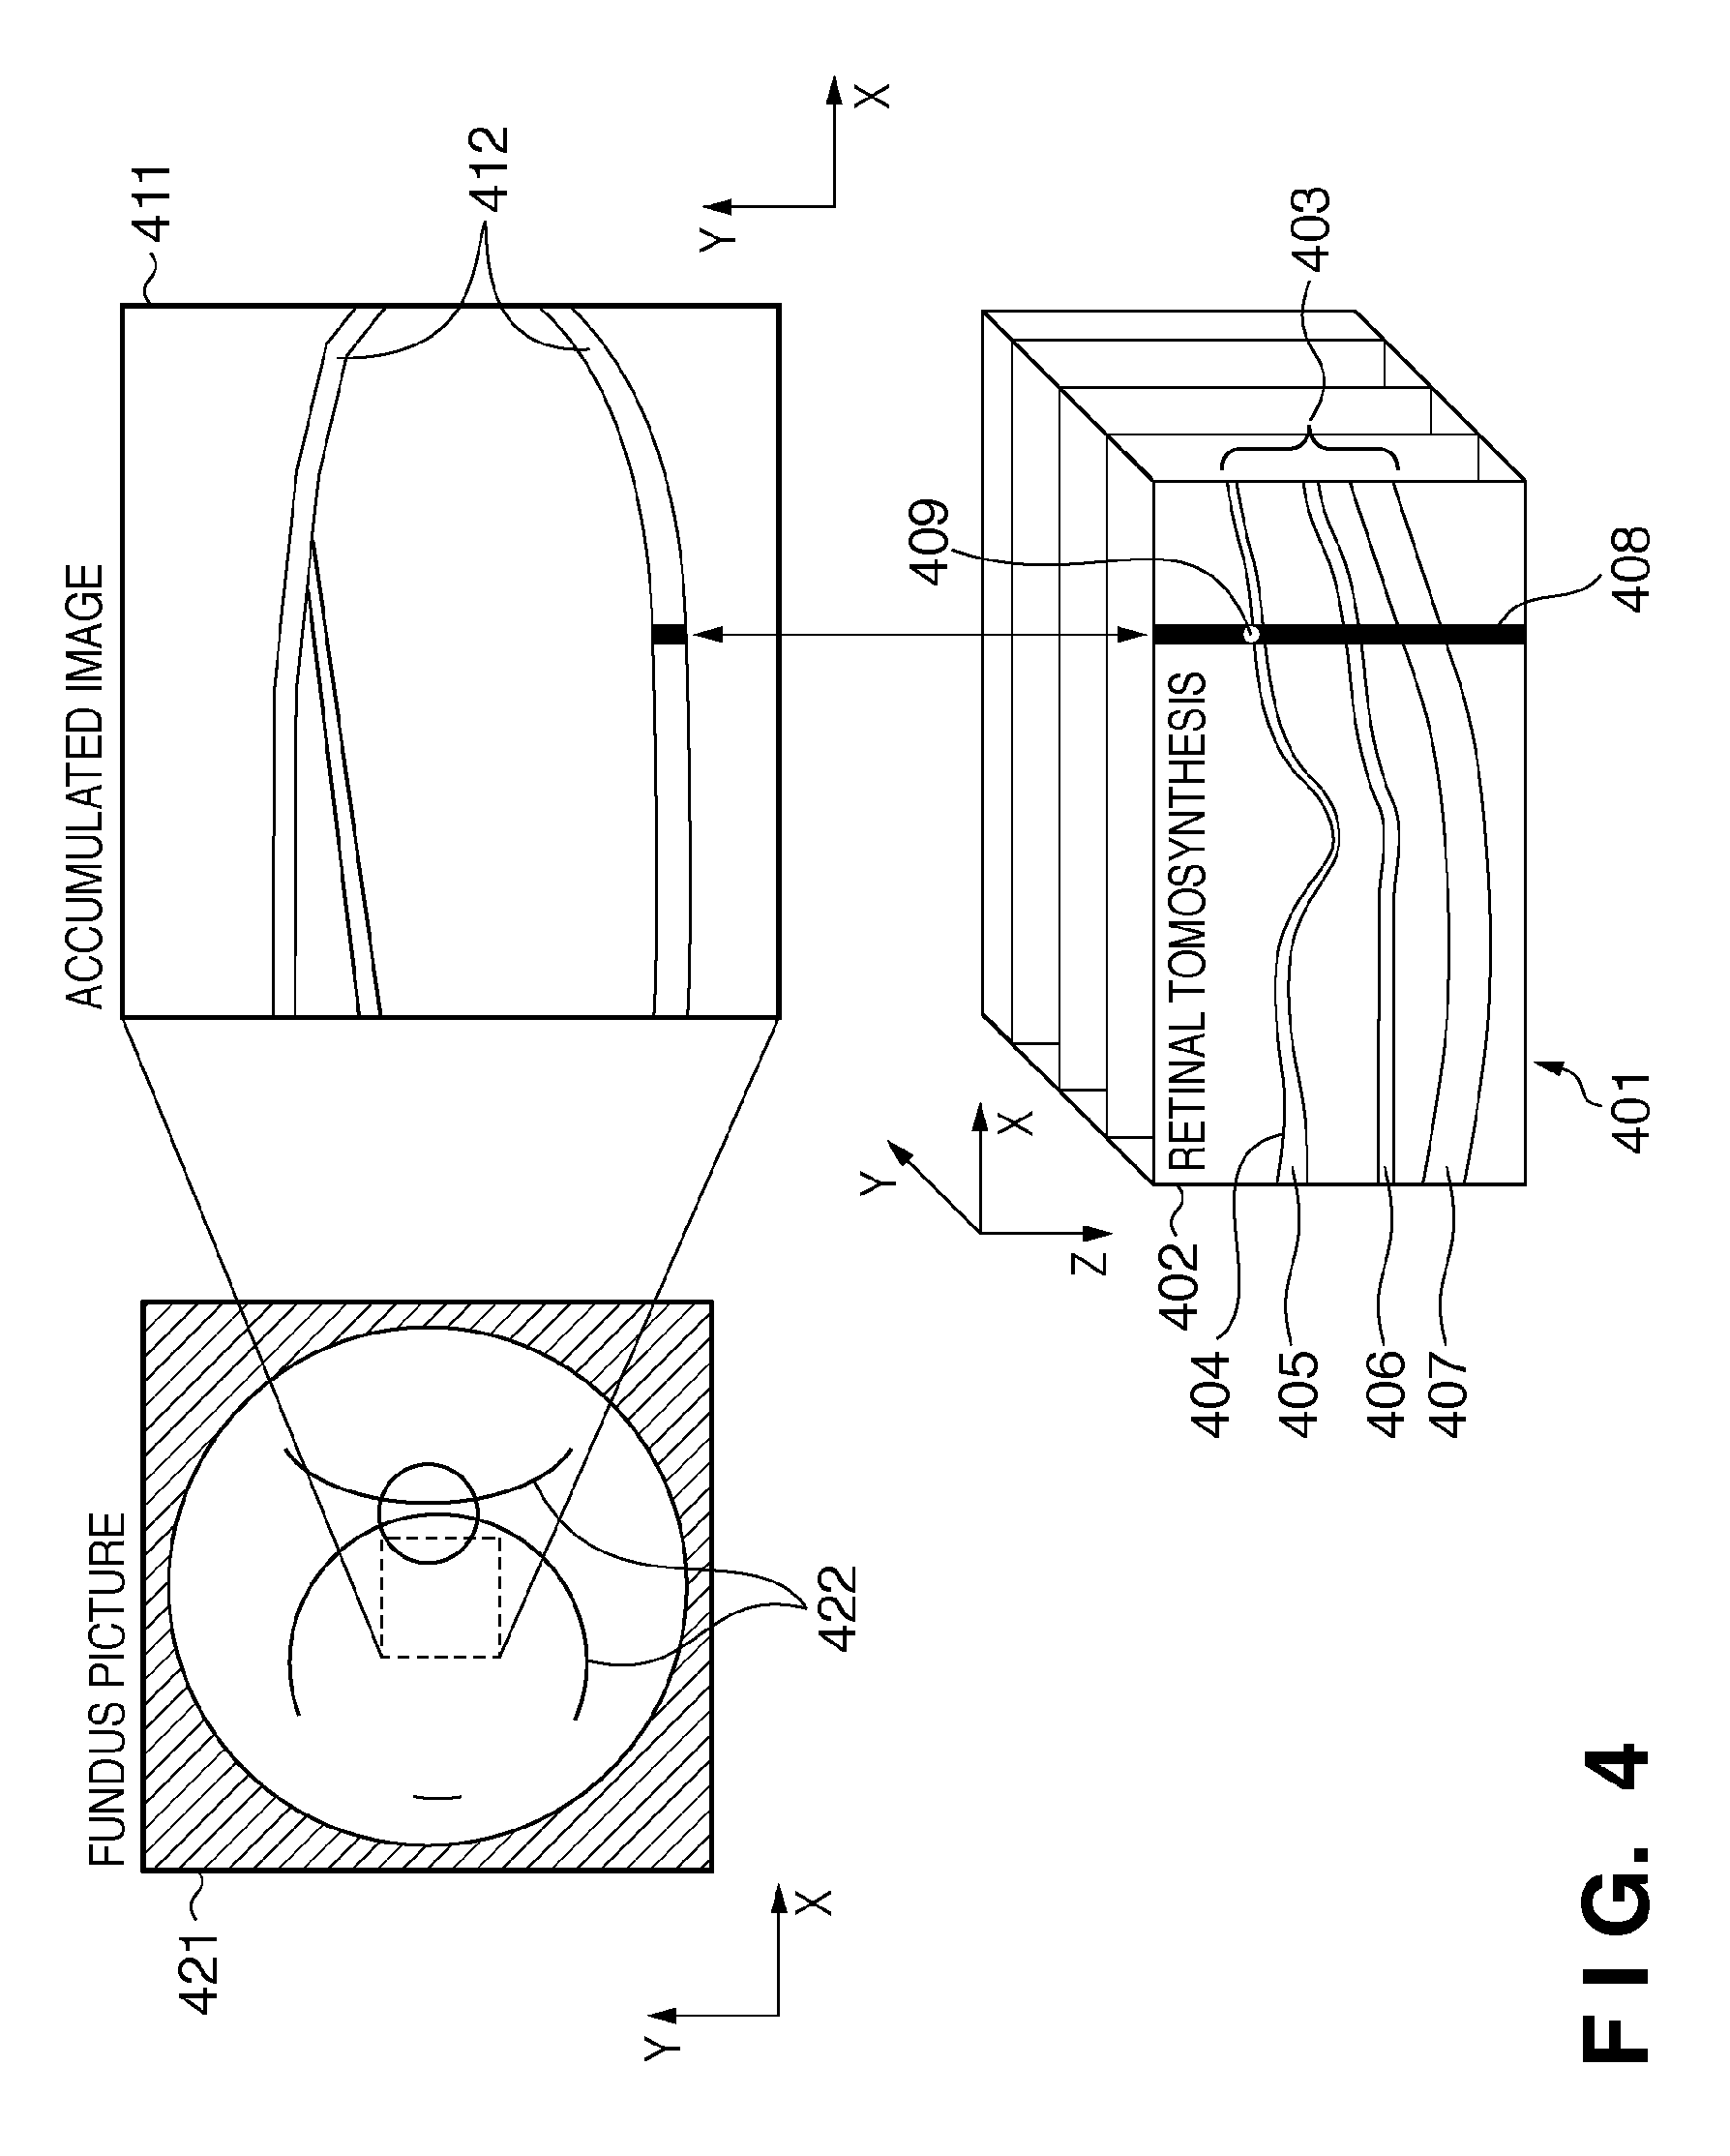 Image processing apparatus, control method thereof and computer program